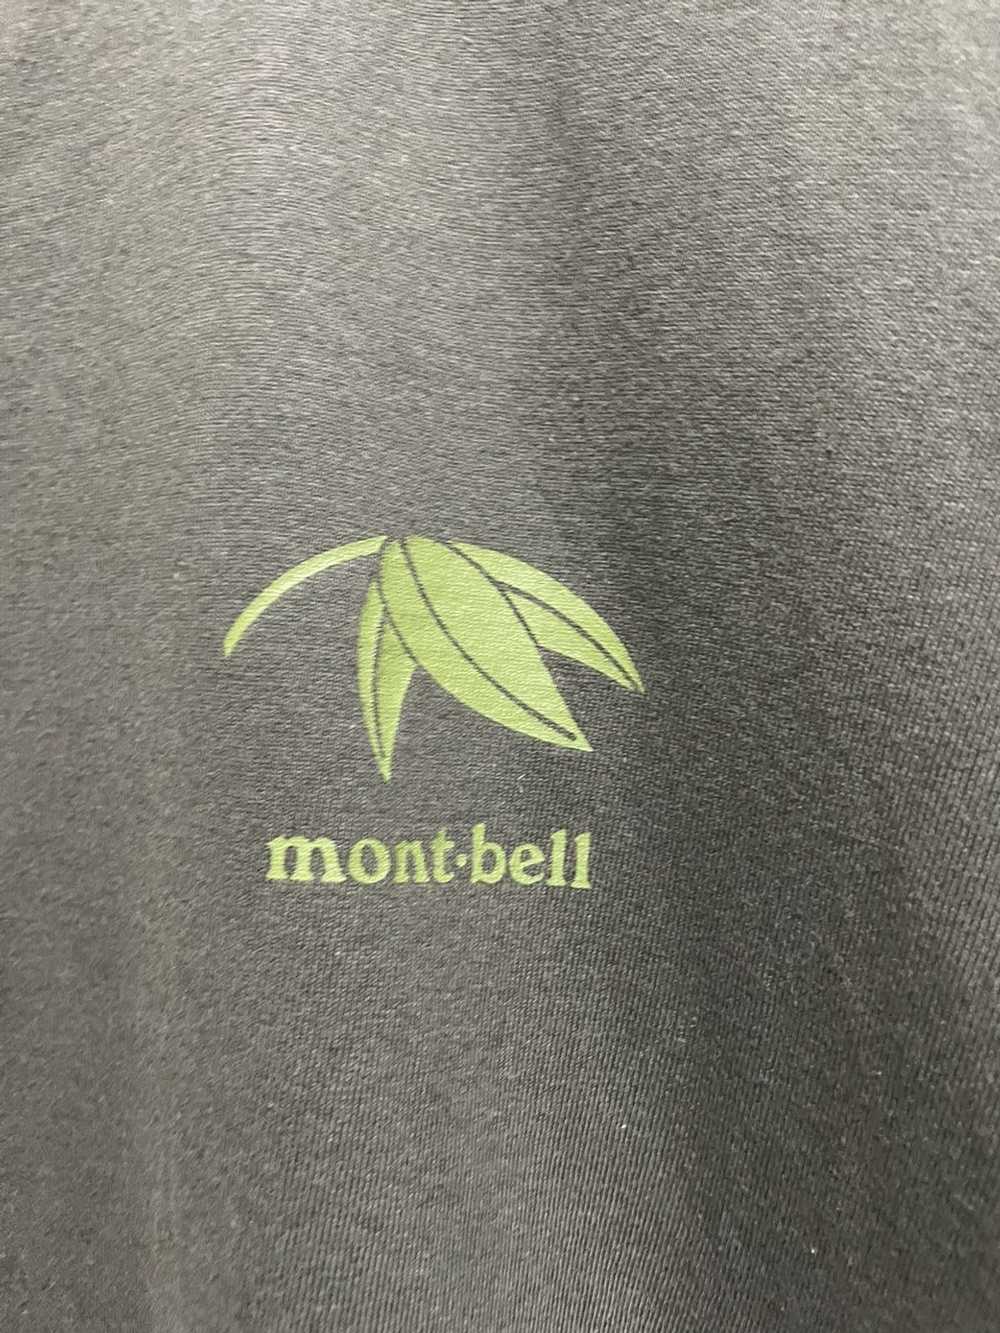 Montbell × Streetwear × Vintage MontBell T shirt - image 3